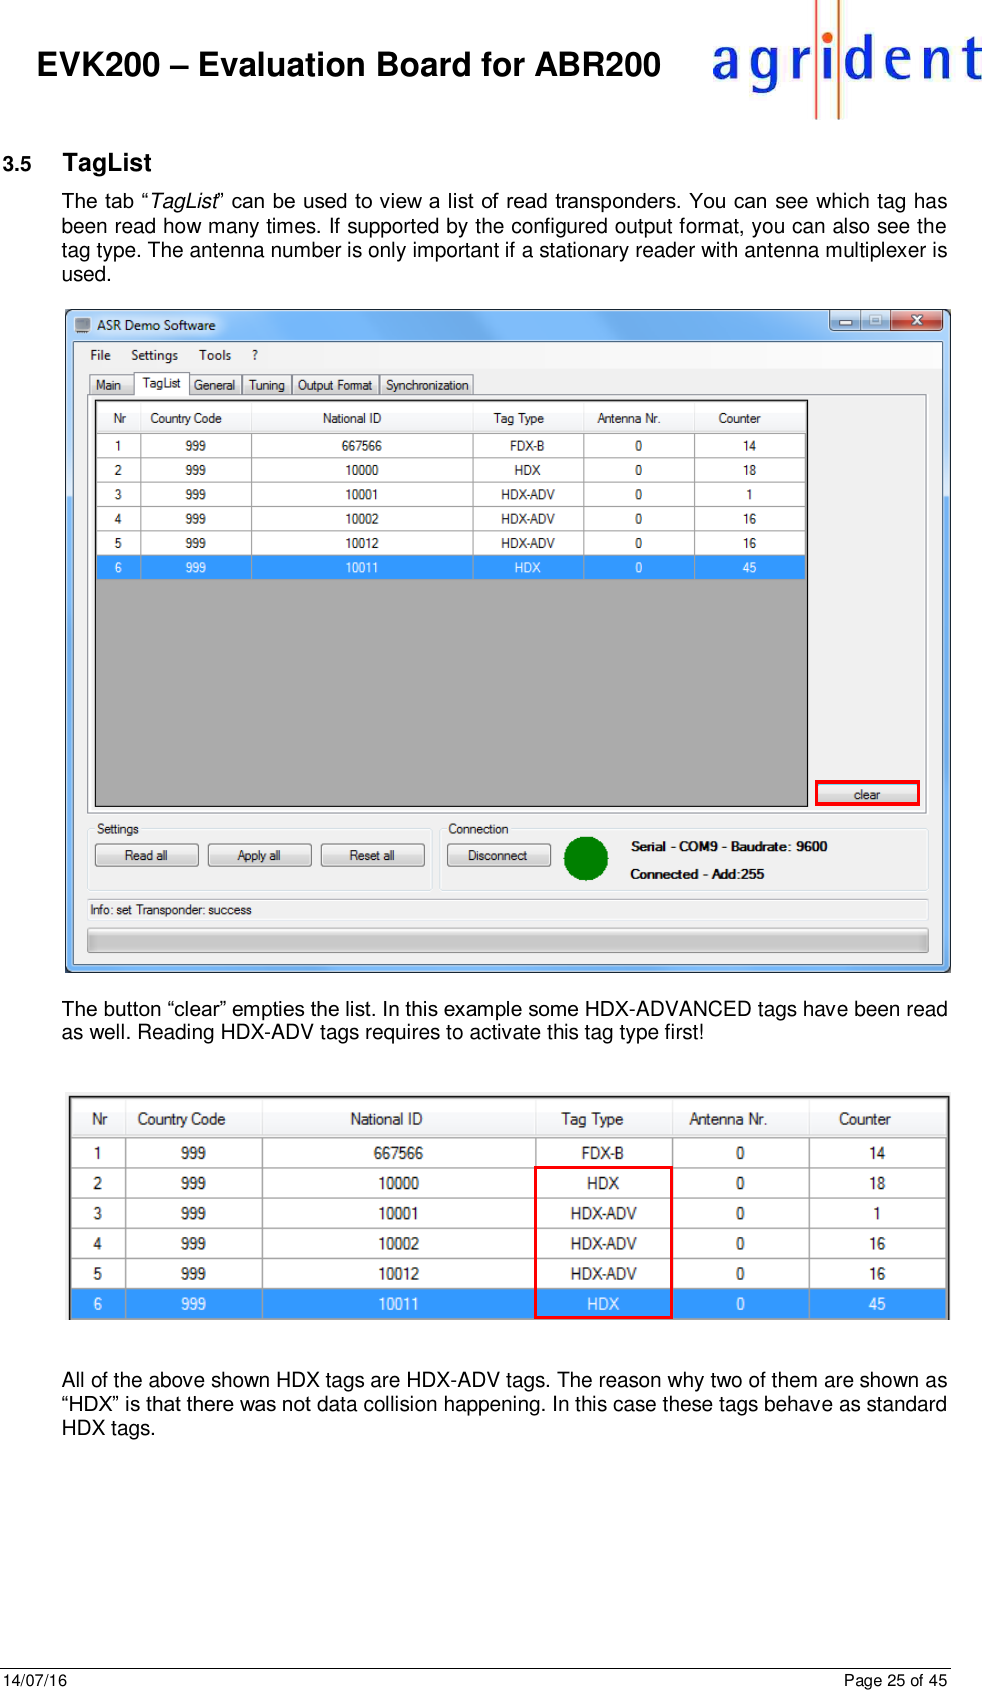 14/07/16      Page 25 of 45      EVK200 – Evaluation Board for ABR200  3.5  TagList The tab “TagList” can be used to view a list of read transponders. You can see which tag has been read how many times. If supported by the configured output format, you can also see the tag type. The antenna number is only important if a stationary reader with antenna multiplexer is used.    The button “clear” empties the list. In this example some HDX-ADVANCED tags have been read as well. Reading HDX-ADV tags requires to activate this tag type first!      All of the above shown HDX tags are HDX-ADV tags. The reason why two of them are shown as “HDX” is that there was not data collision happening. In this case these tags behave as standard HDX tags.  